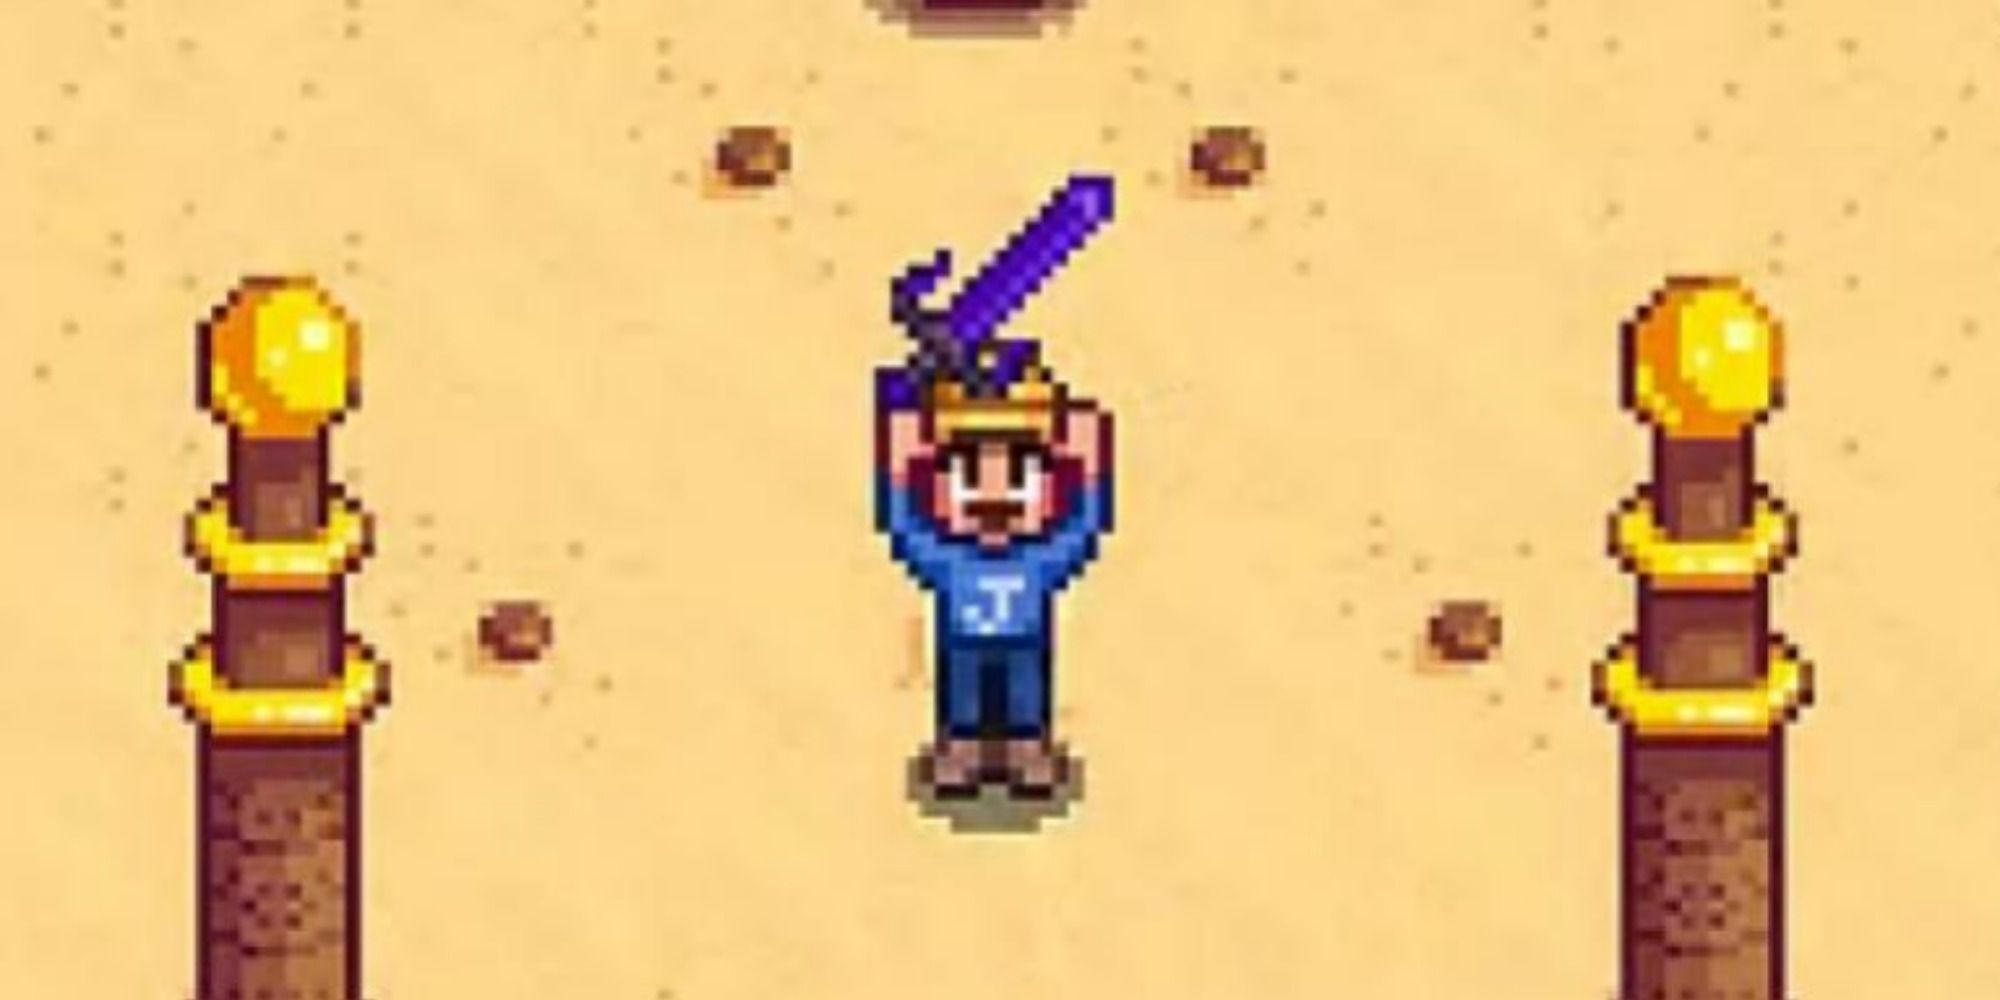 character holding the obsidian edge sword in stardew valley